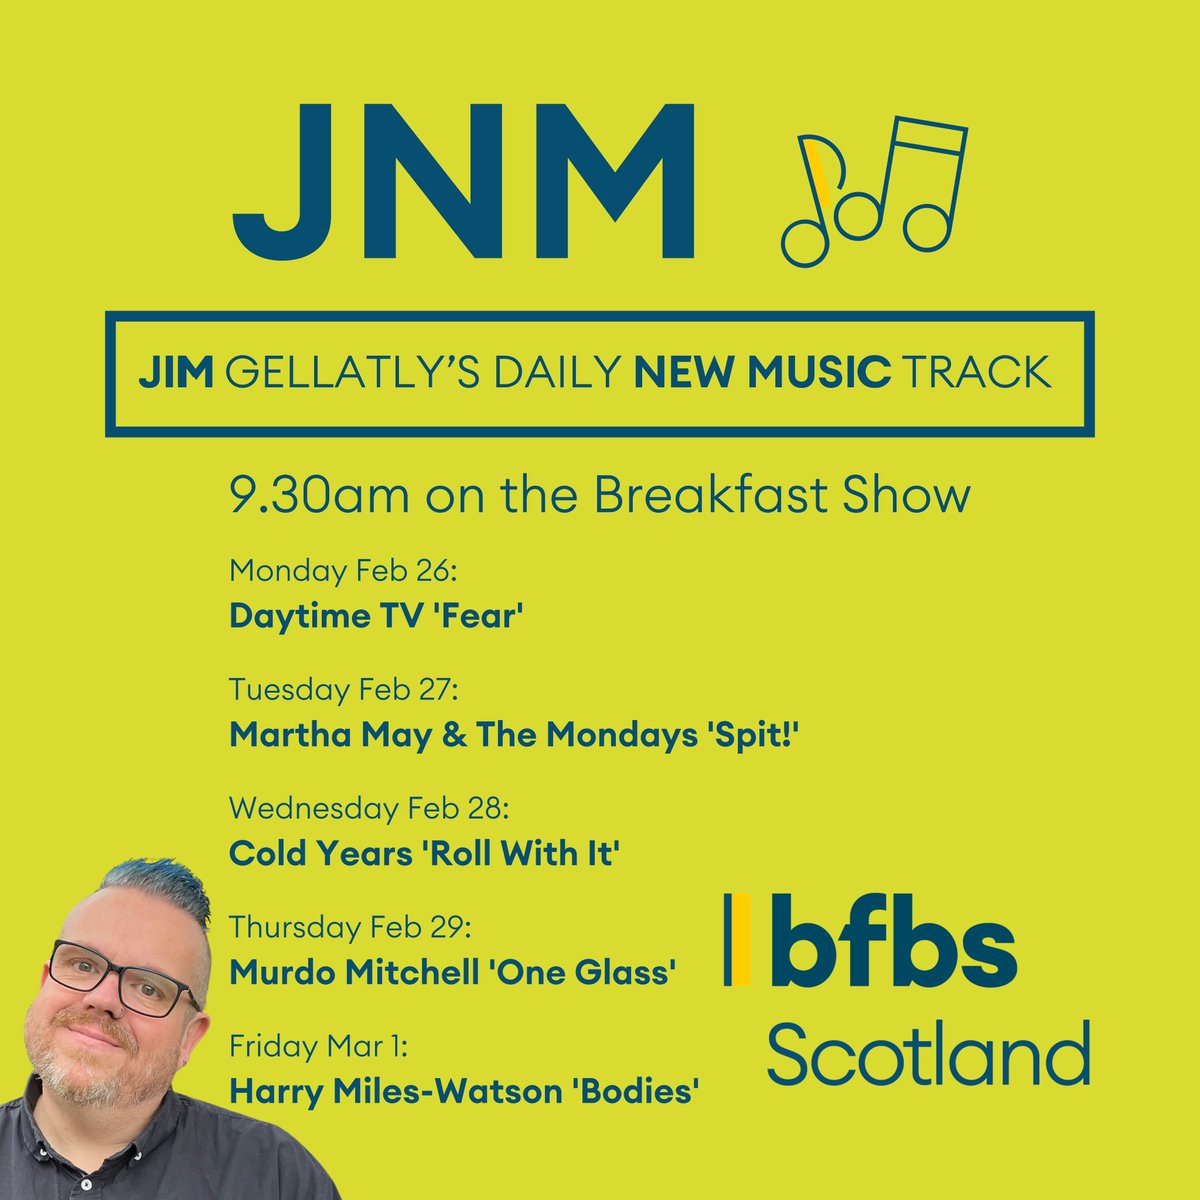 Jim's got more New Music from Scotland on the Breakfast Show! 🏴󠁧󠁢󠁳󠁣󠁴󠁿 📻 bfbs.com/scotland